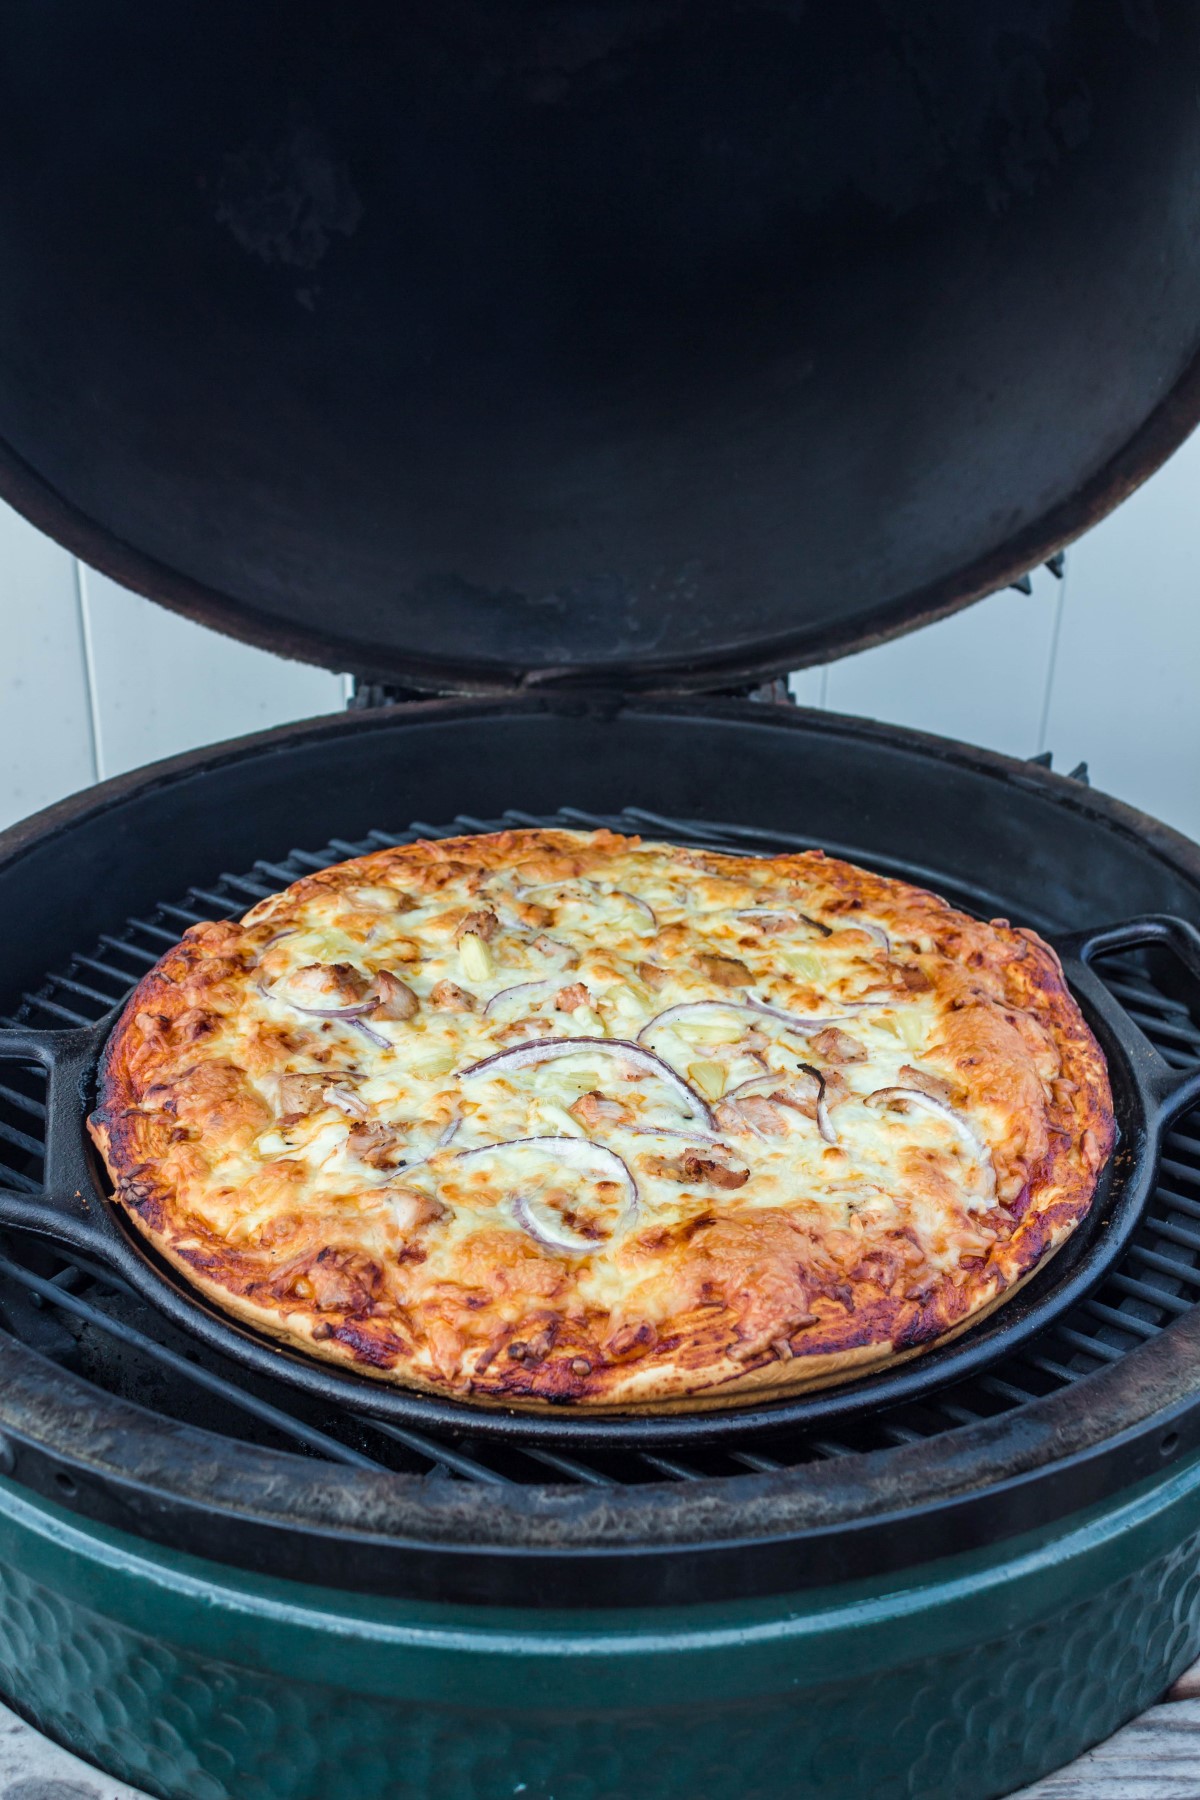 BBQ chicken pizza cooking on the grill in a cast iron pizza pan